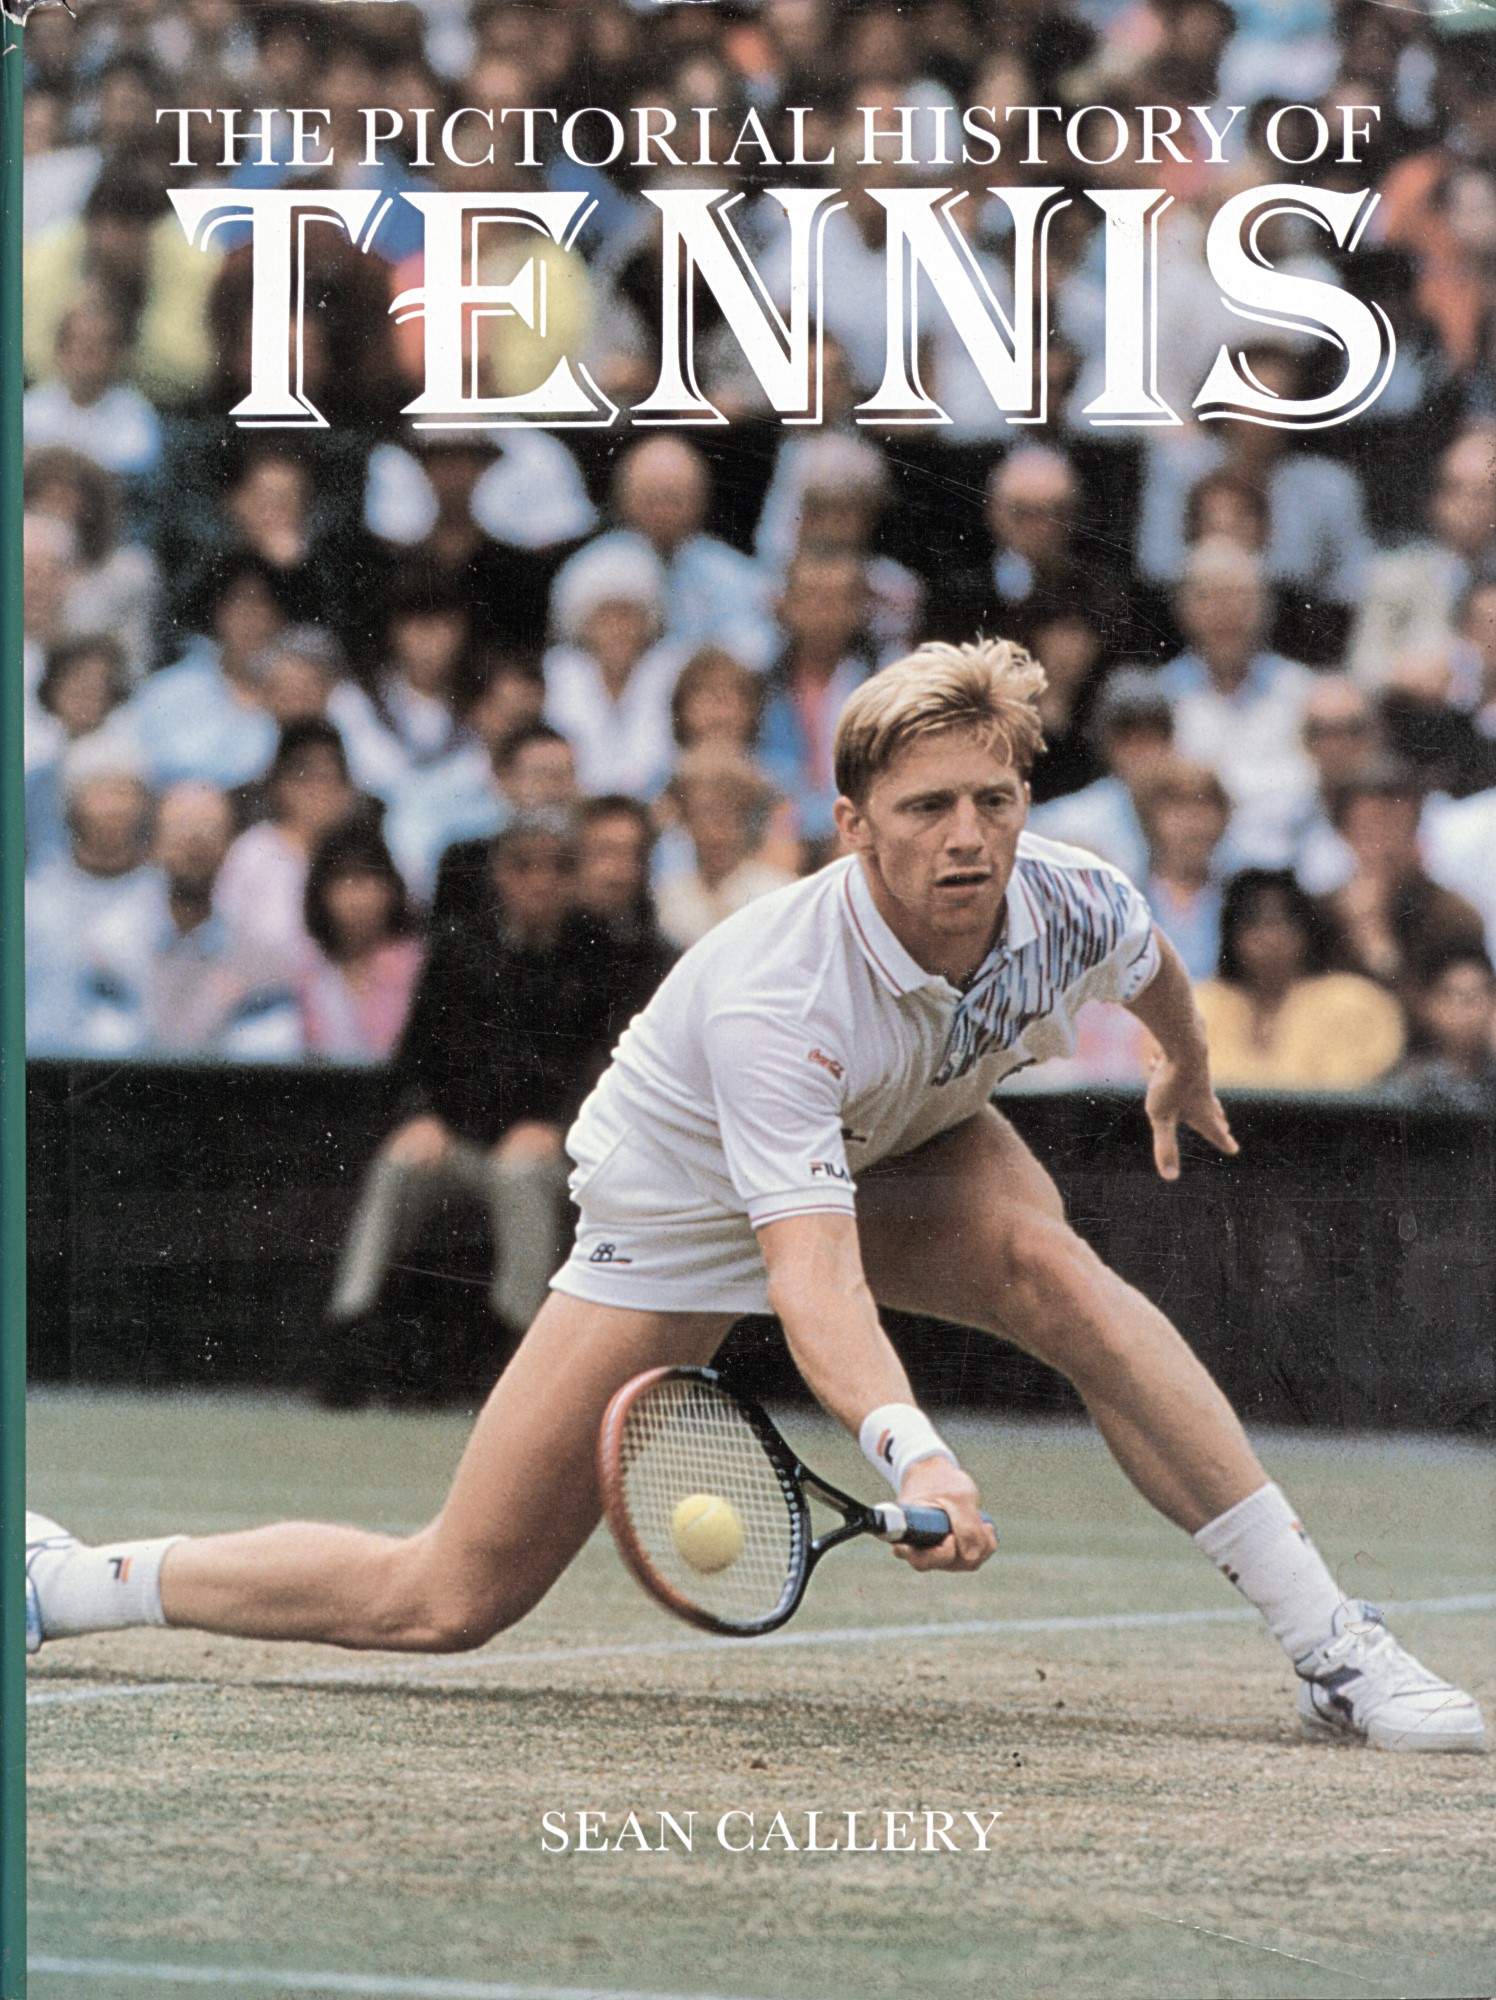 The Pictorial History of Tennis